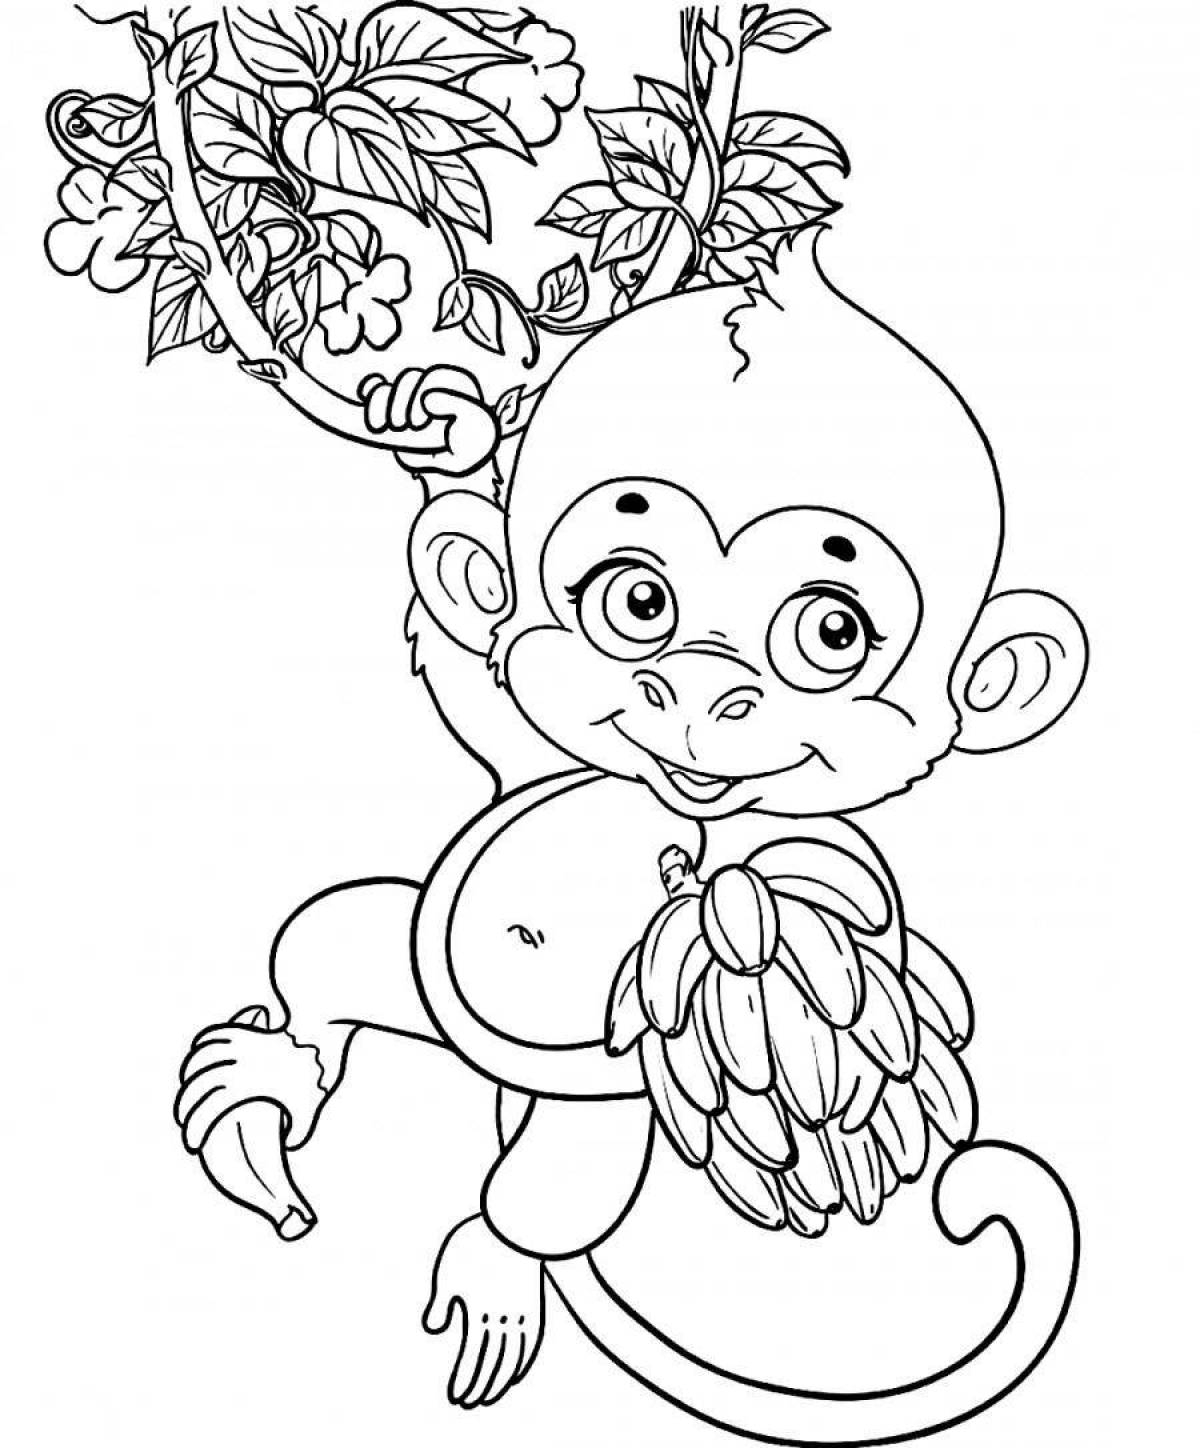 Creative chimpanzee coloring book for kids